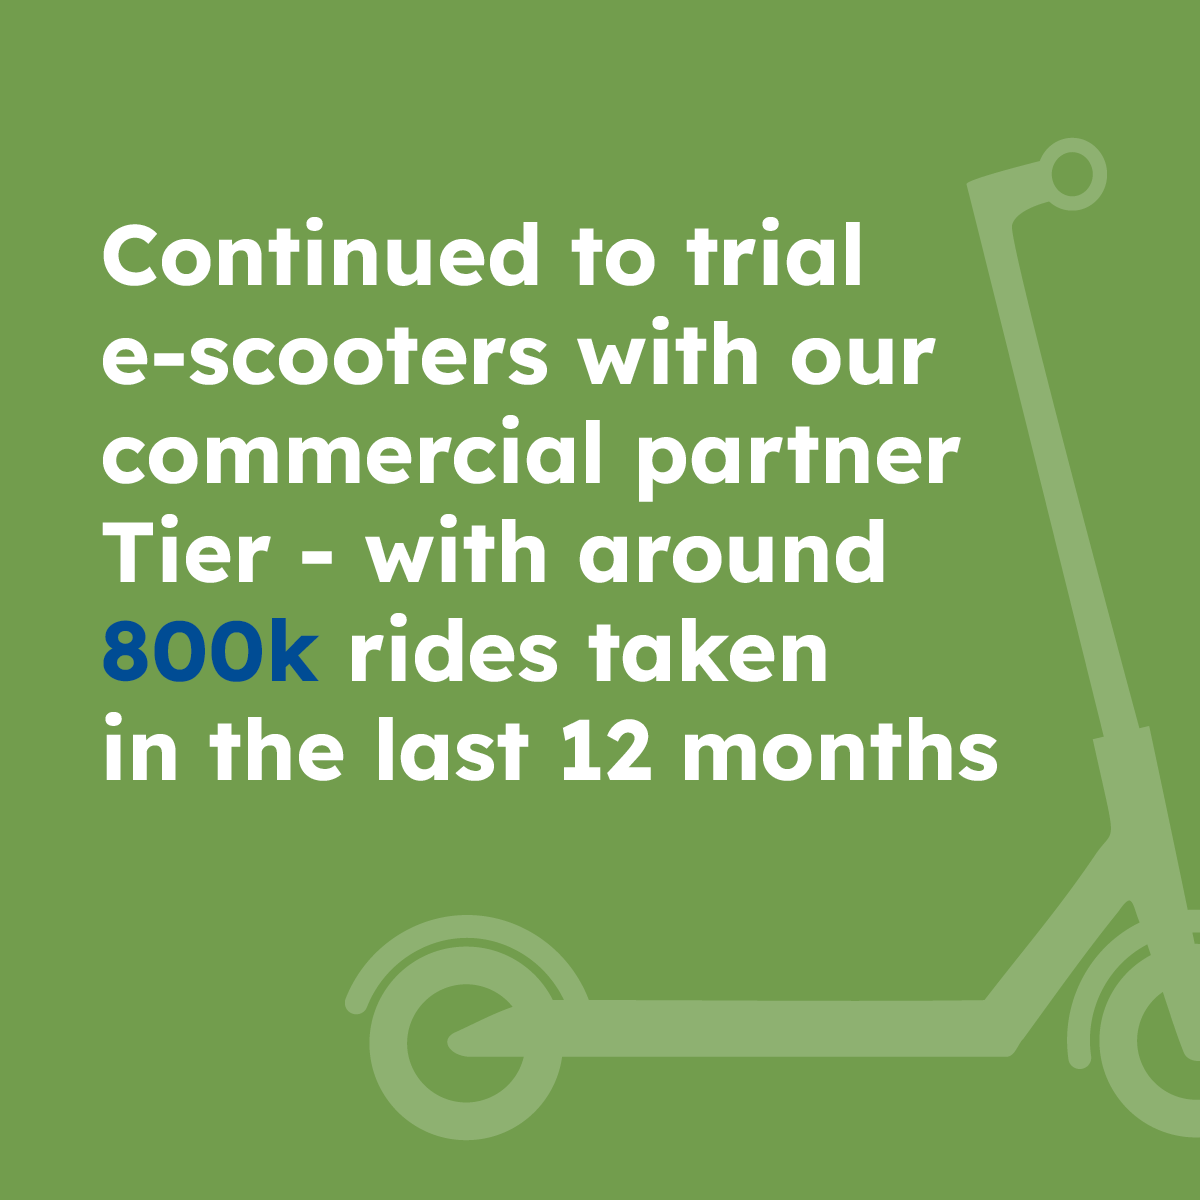 Continued to trial e-scooters with our commercial partner Tier - with around 800k rides taken in the last 12 months